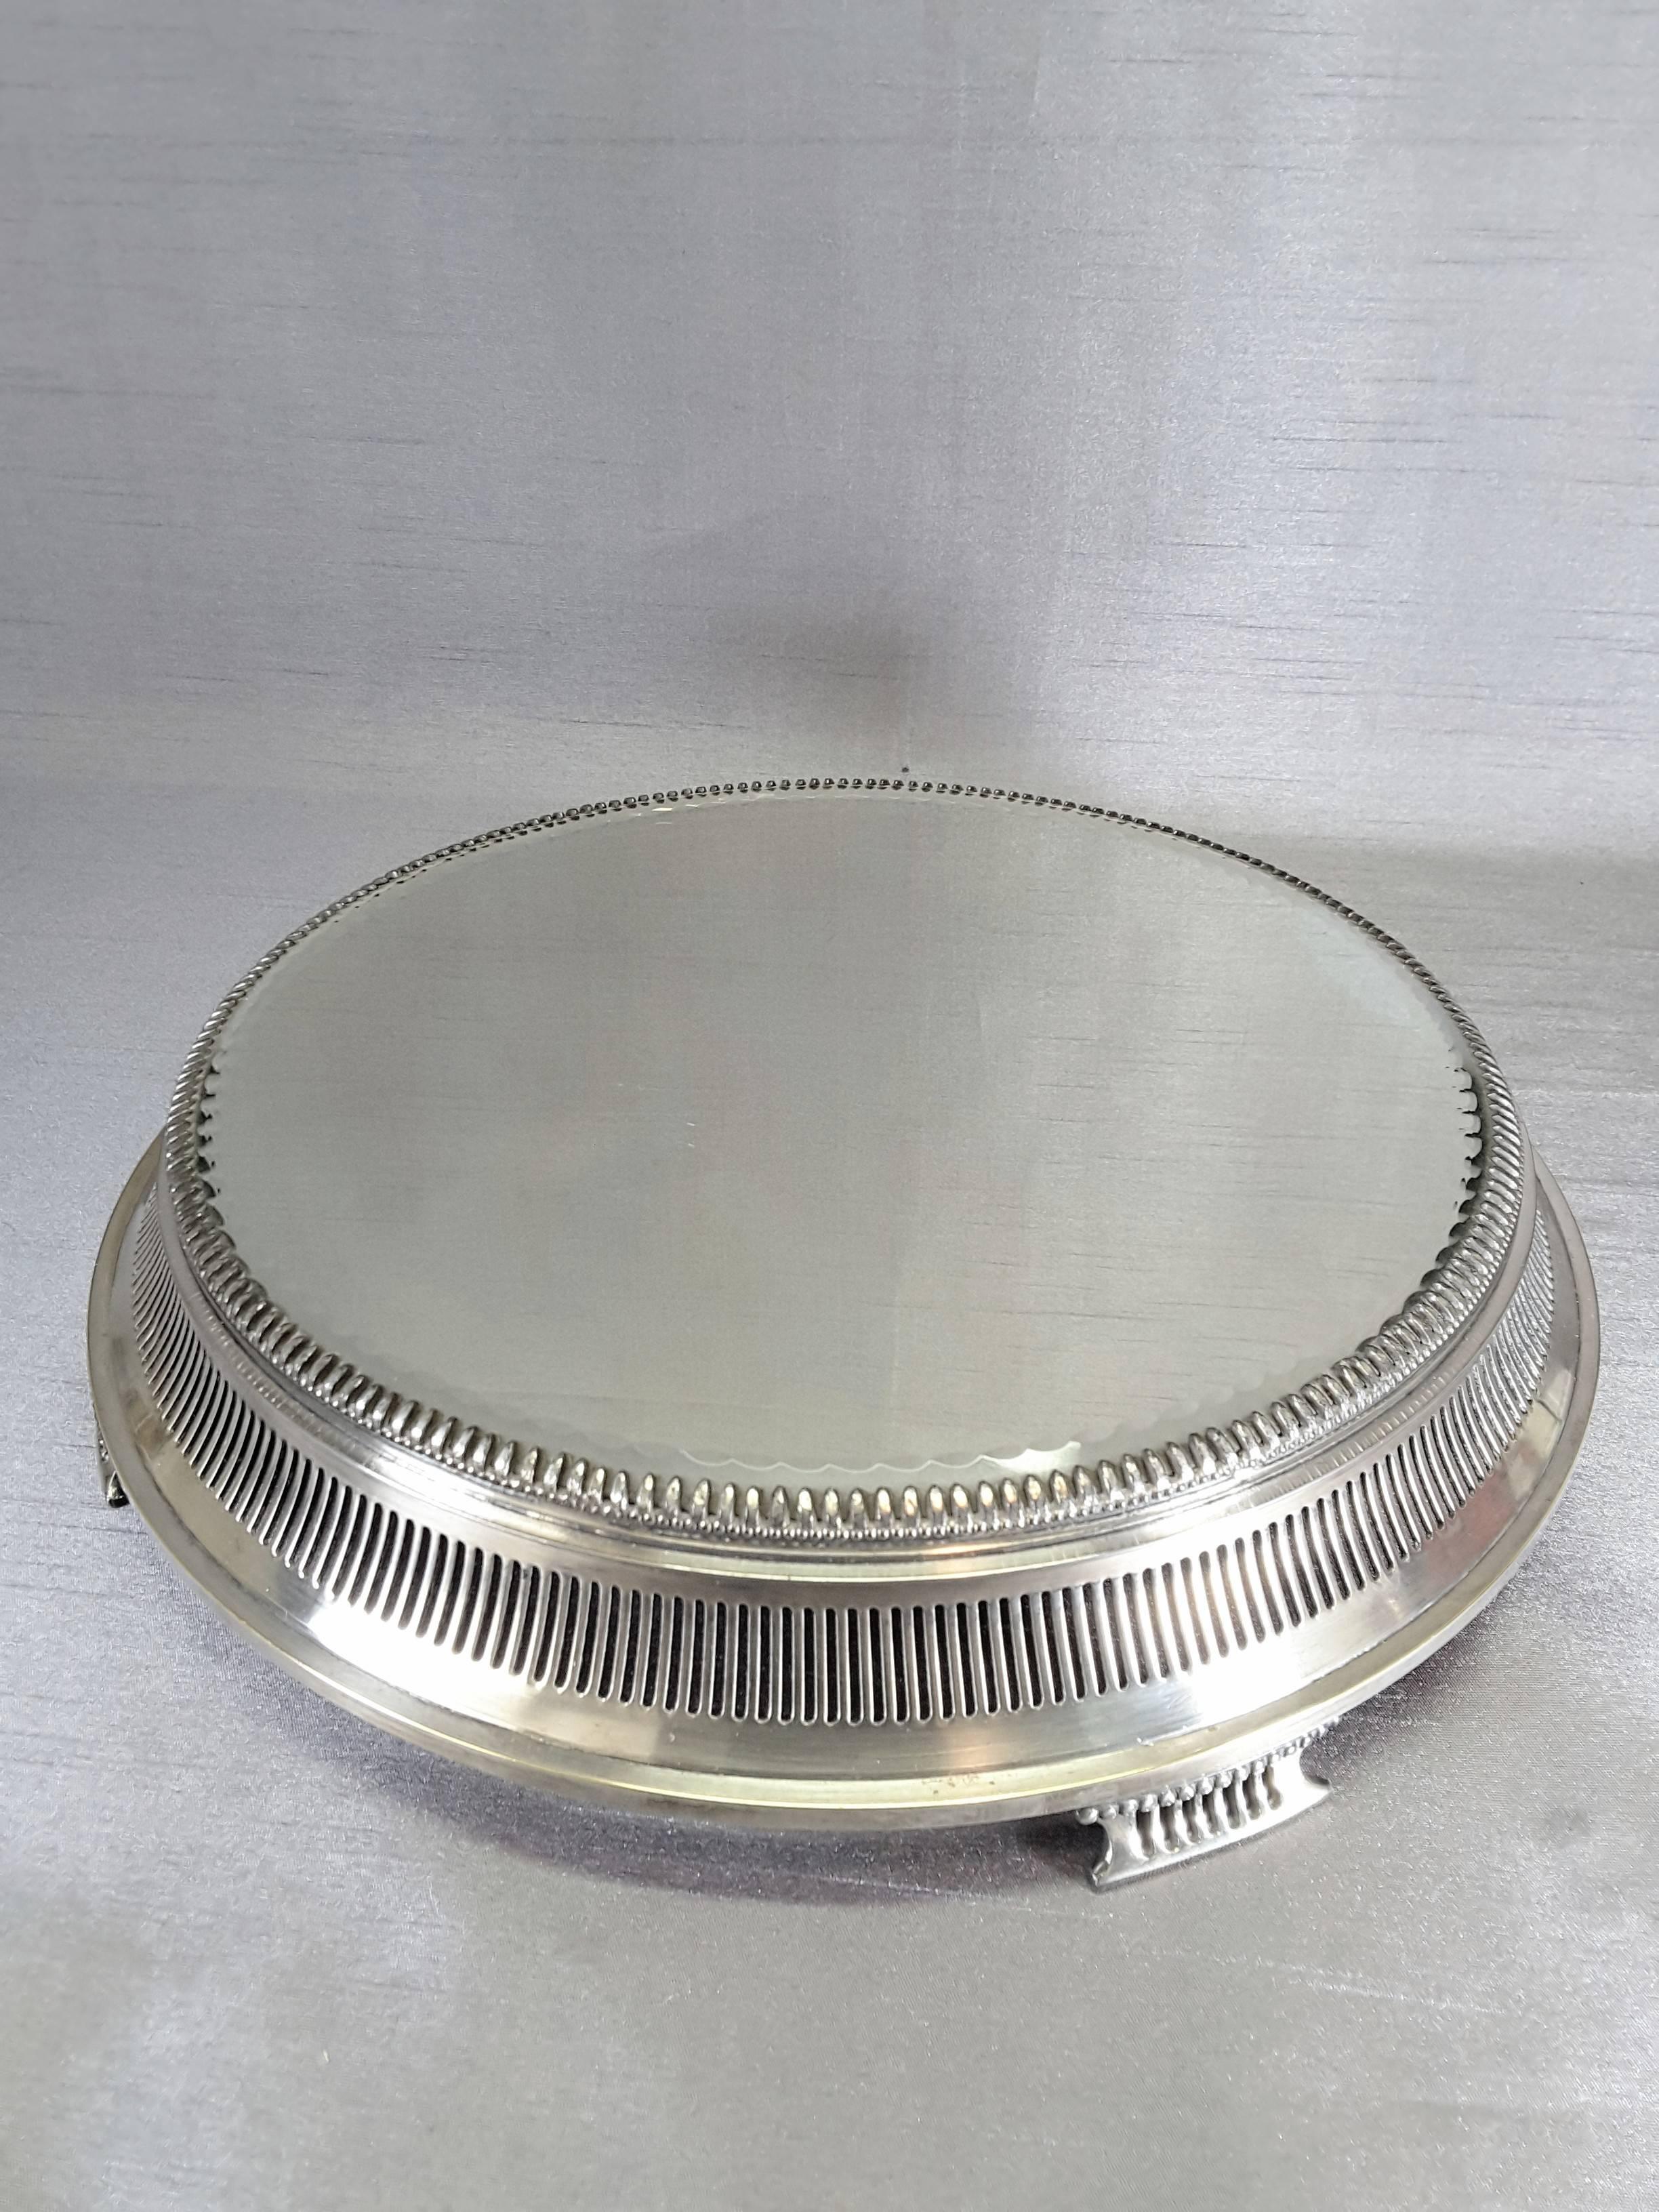 Edwardian Silver Plate Centrepiece or Wedding Cake Stand 4